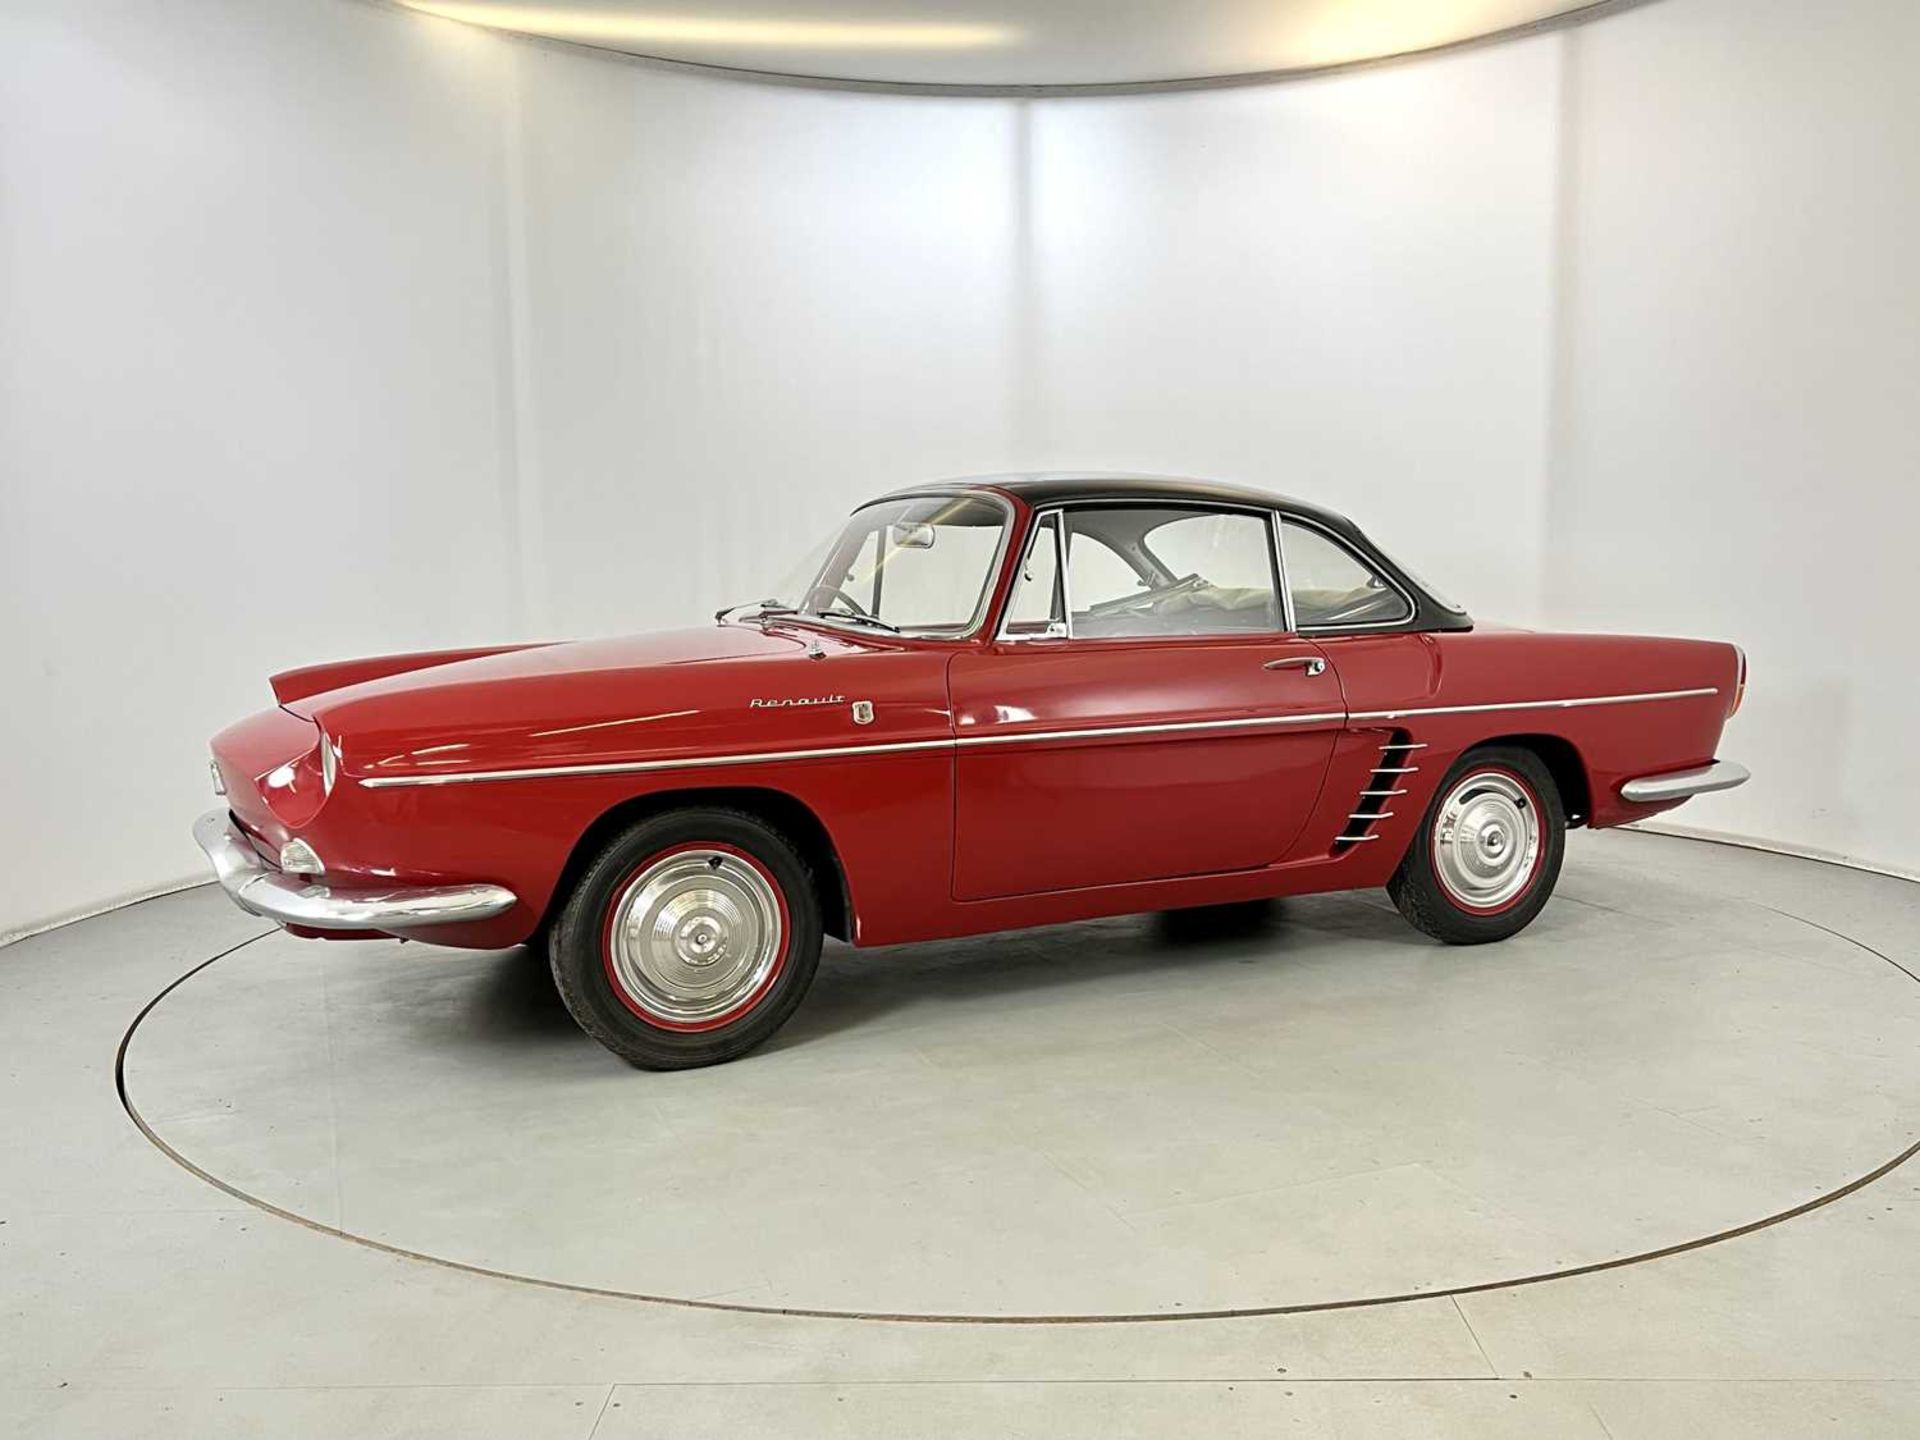 1962 Renault Floride Convertible - Image 4 of 43